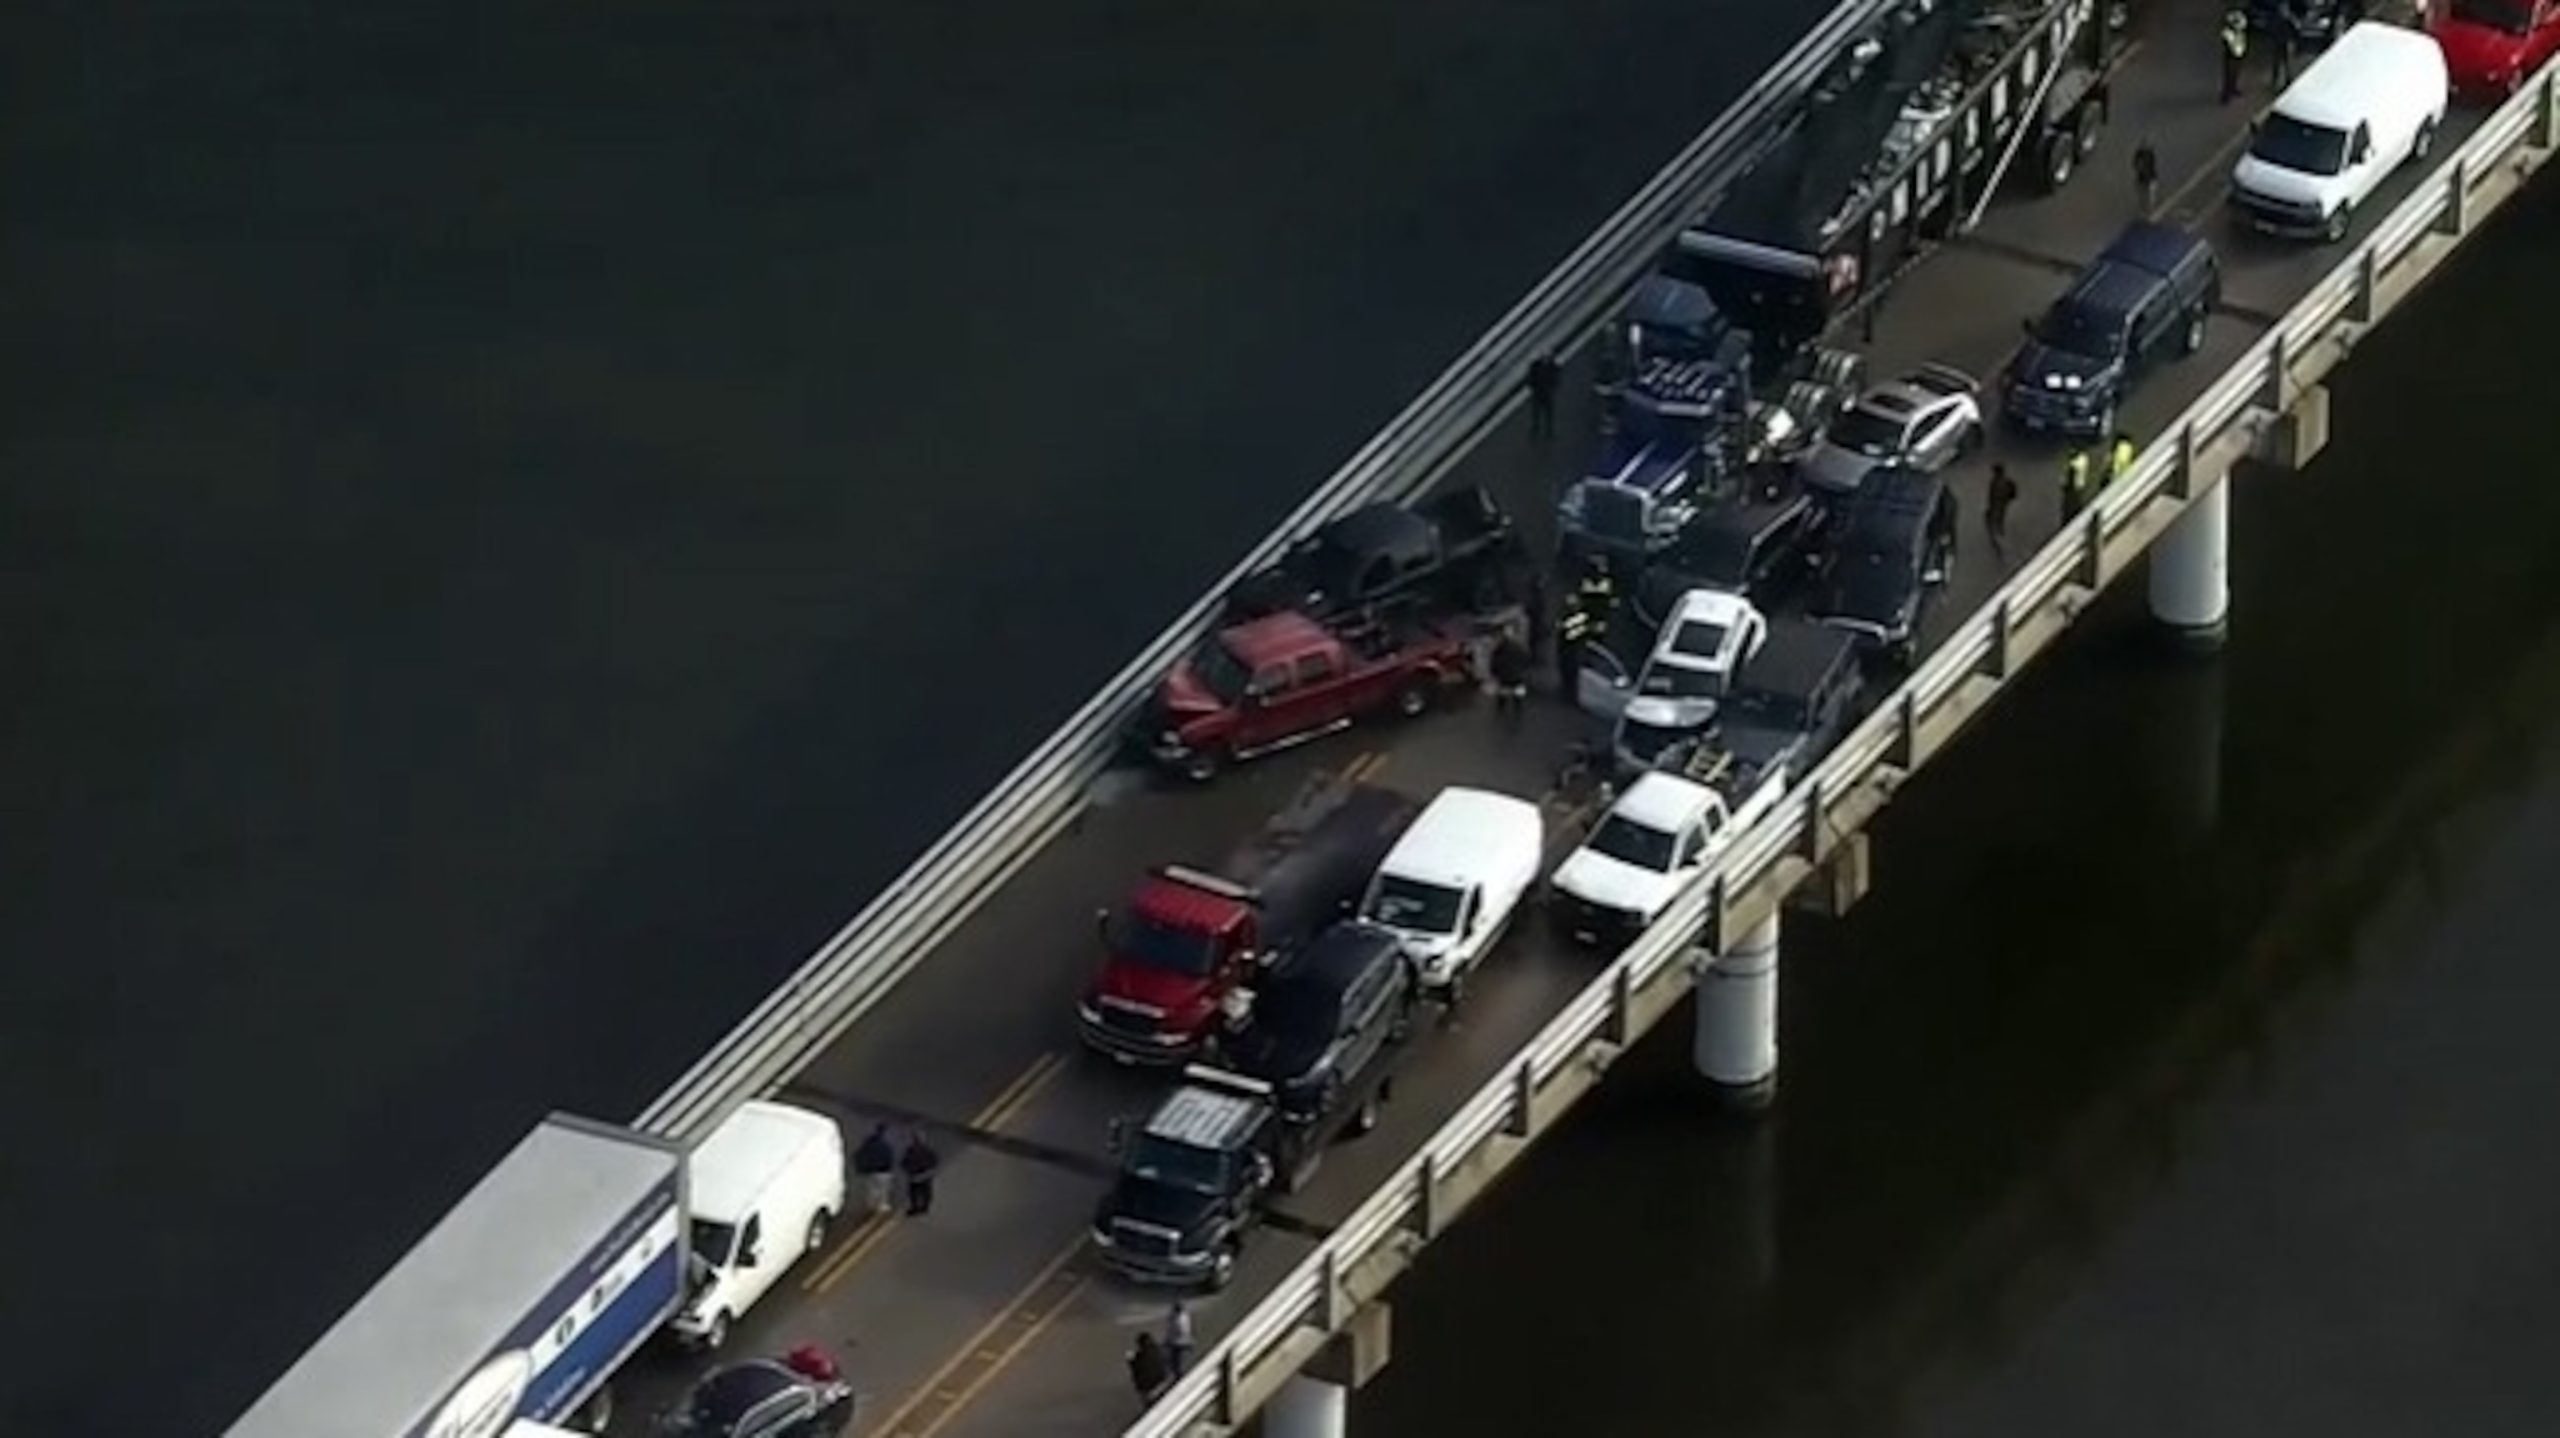 Police report multiple injuries in a severe multi-vehicle collision on Maryland's Bay Bridge